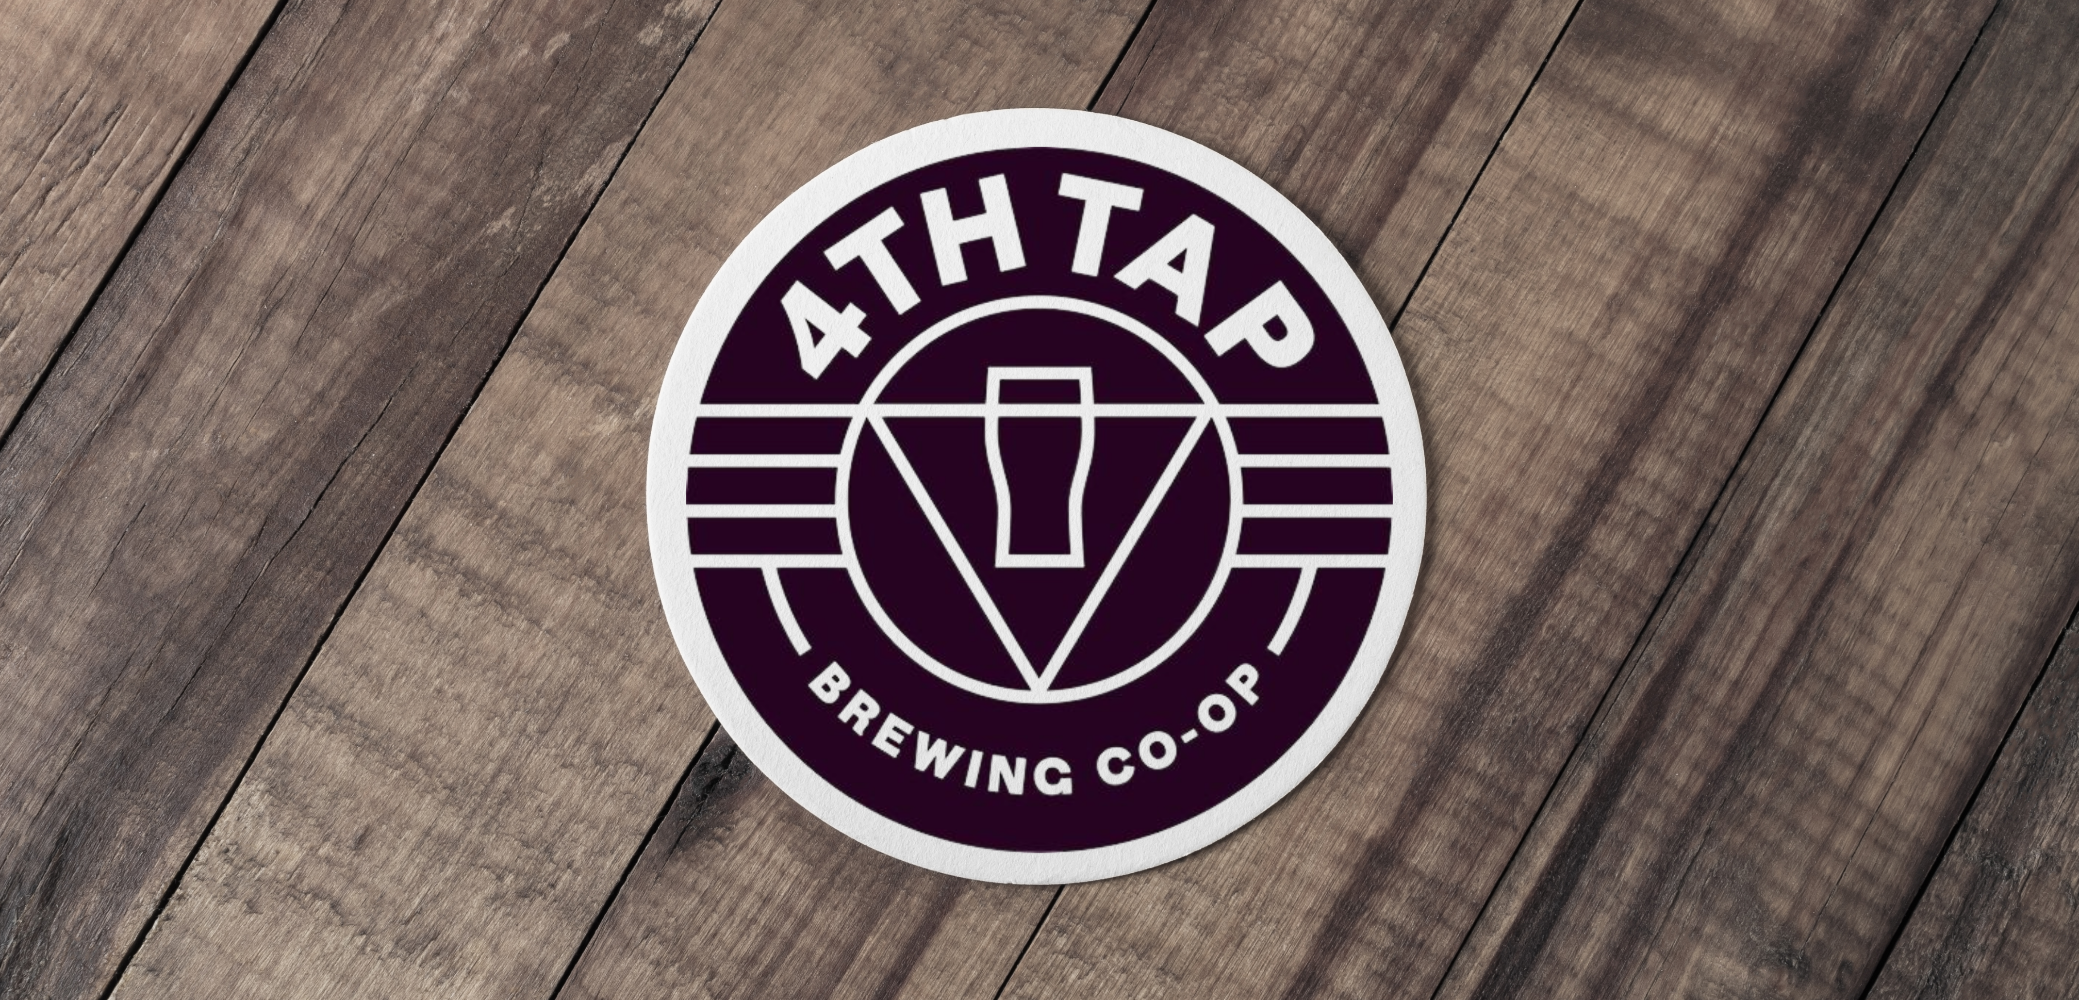 4th Tap Brewing Company: 2015 Deutsche 30 BBL Brewhouse, 30 to 60 BBL Fermenters and Brites, Wild Goose WGC250, RAD Mill, Columbia Boiler & More